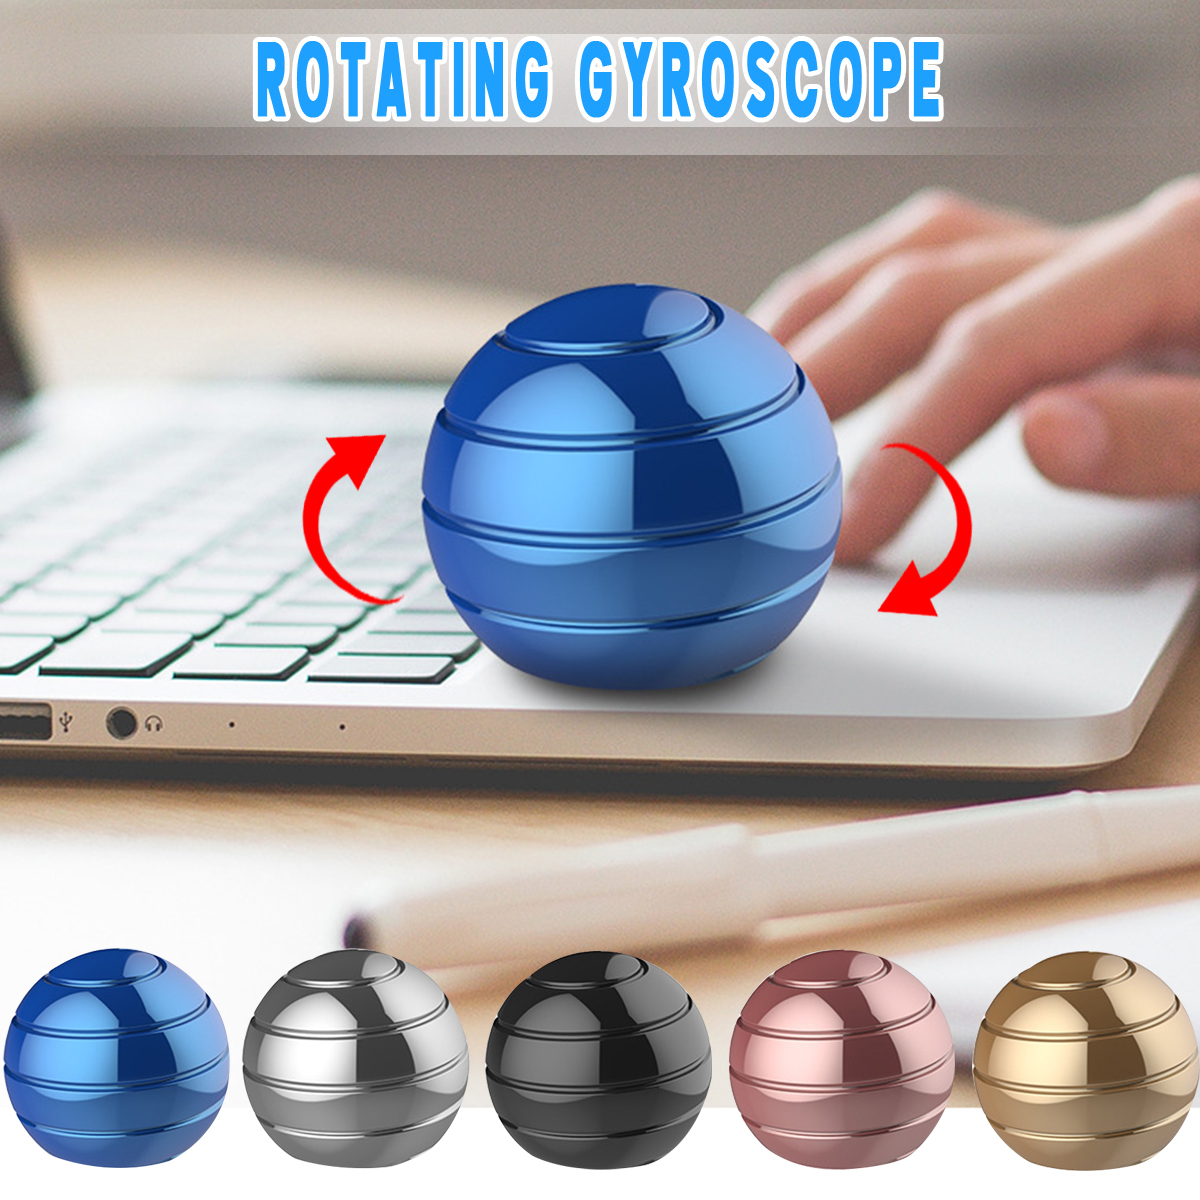 Decompression-Gyroscope-Rotating-Ball-Spherical-Desk-Gyro-Optical-Illusion-Flowing-Adults-Toy-1541169-1